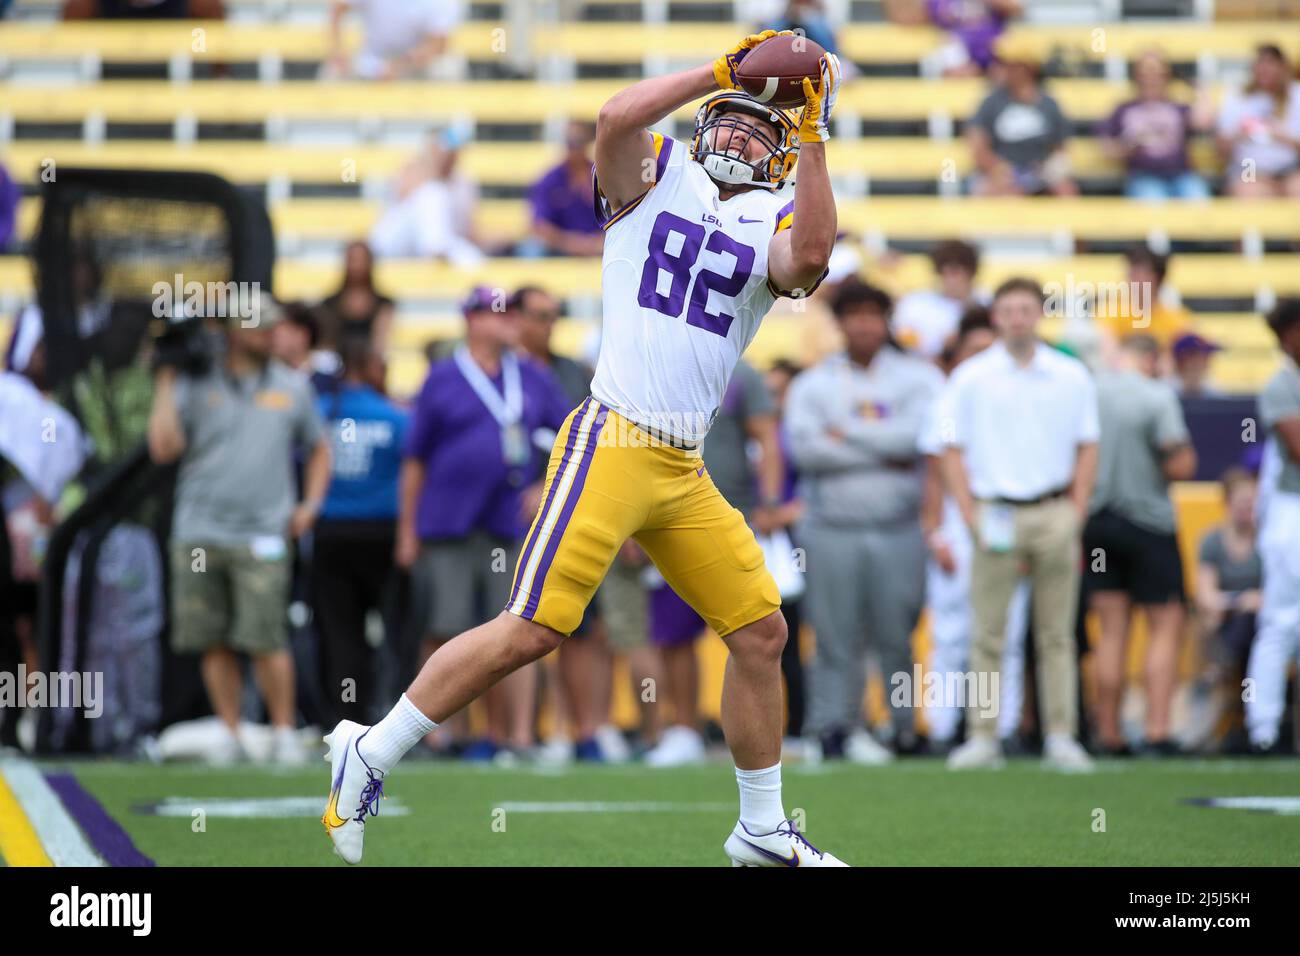 Baton Rouge, LA, USA. 23rd Apr, 2022. LSU tight end Jack Mashburn (82) brings in a pass during the National L Club LSU Football Spring Game at Tiger Stadium in Baton Rouge, LA. Jonathan Mailhes/CSM/Alamy Live News Stock Photo